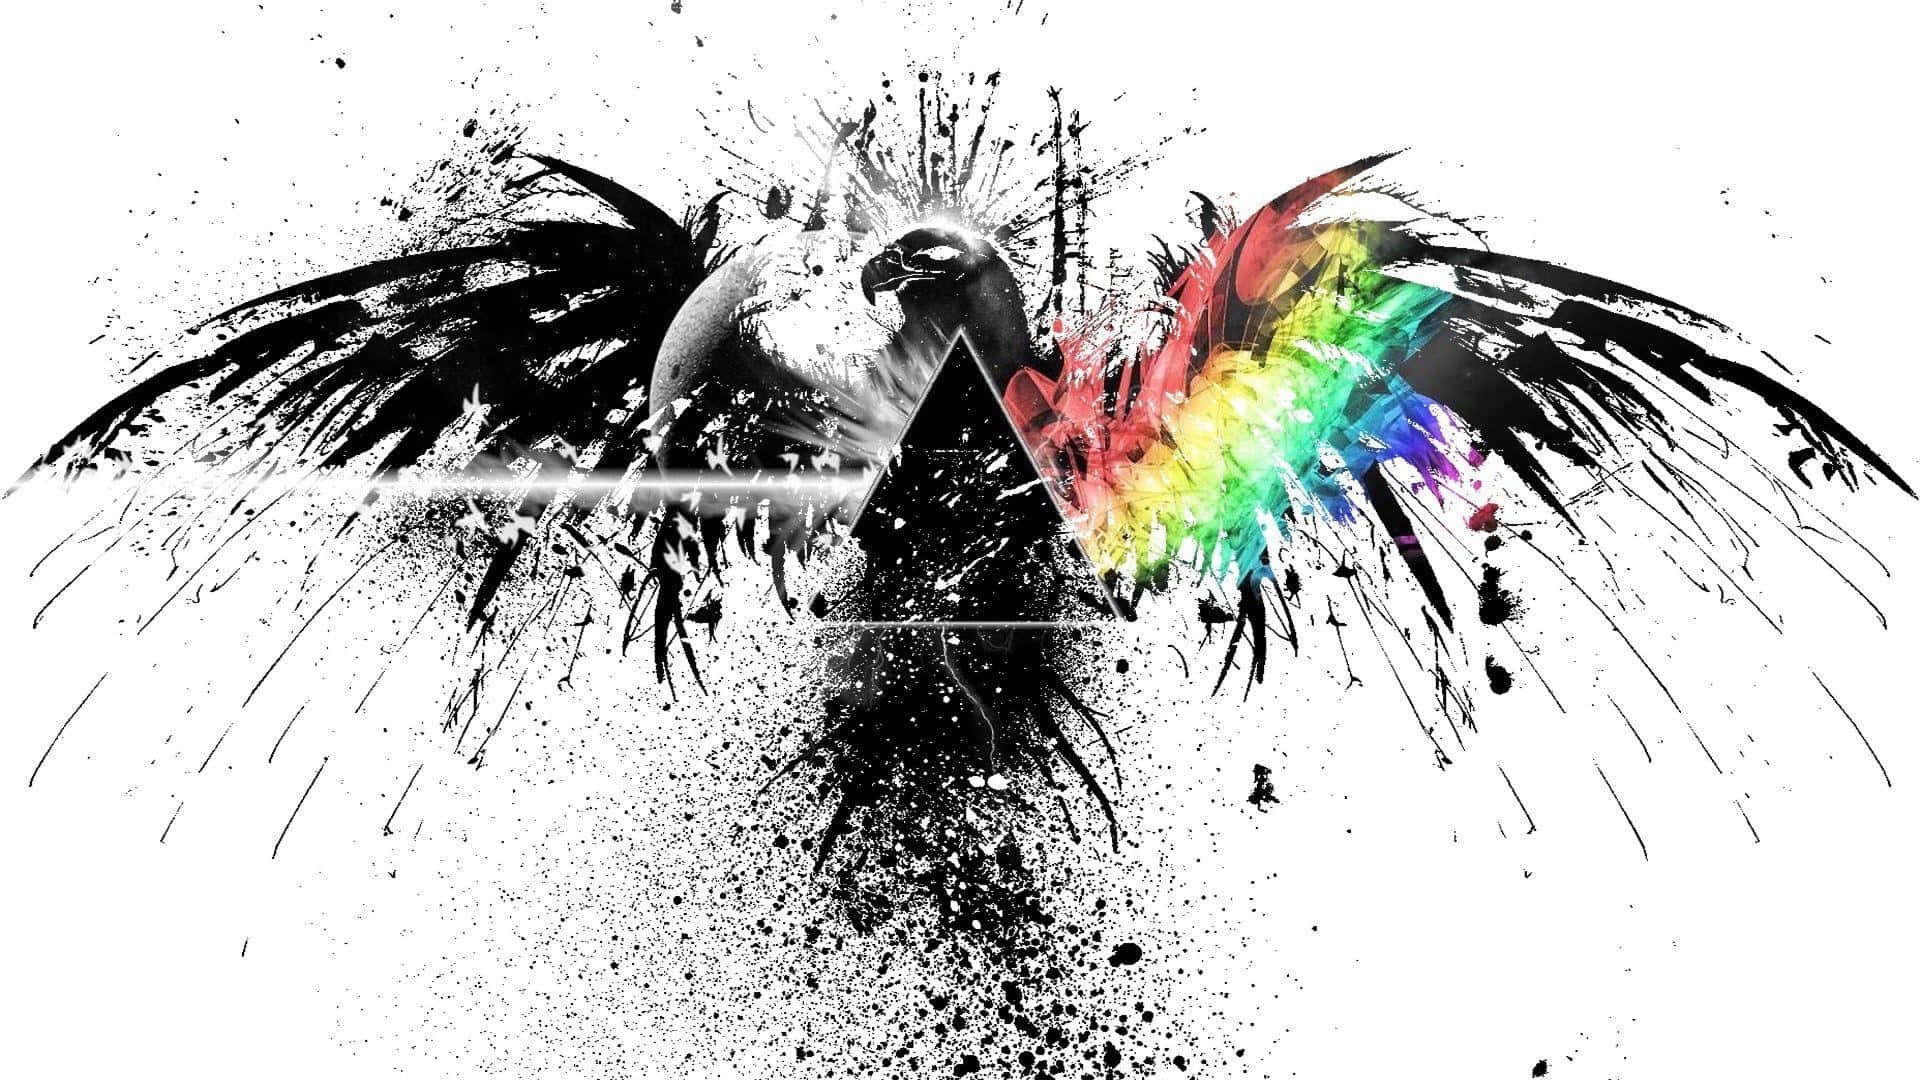 A Black And White Image Of A Bird With A Rainbow